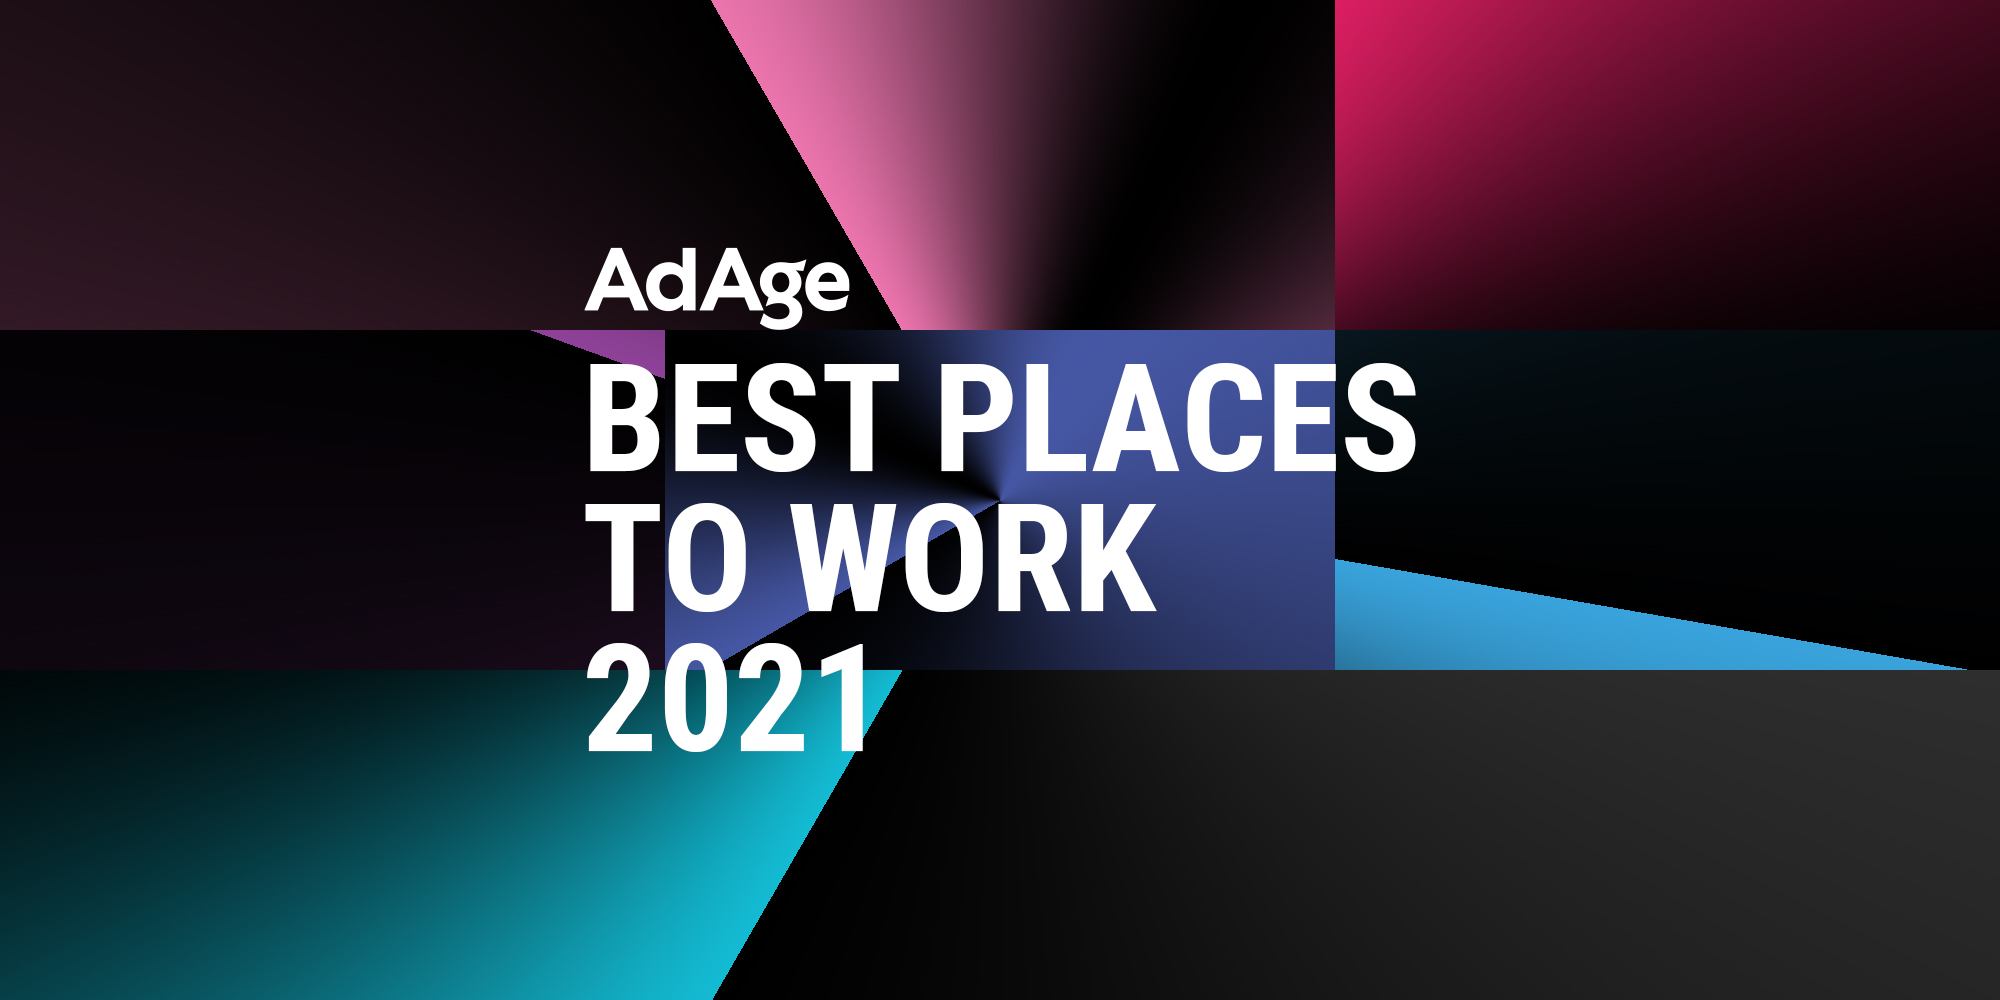 VideoAmp is Named One of Ad Age's Best Places To Work in 2021